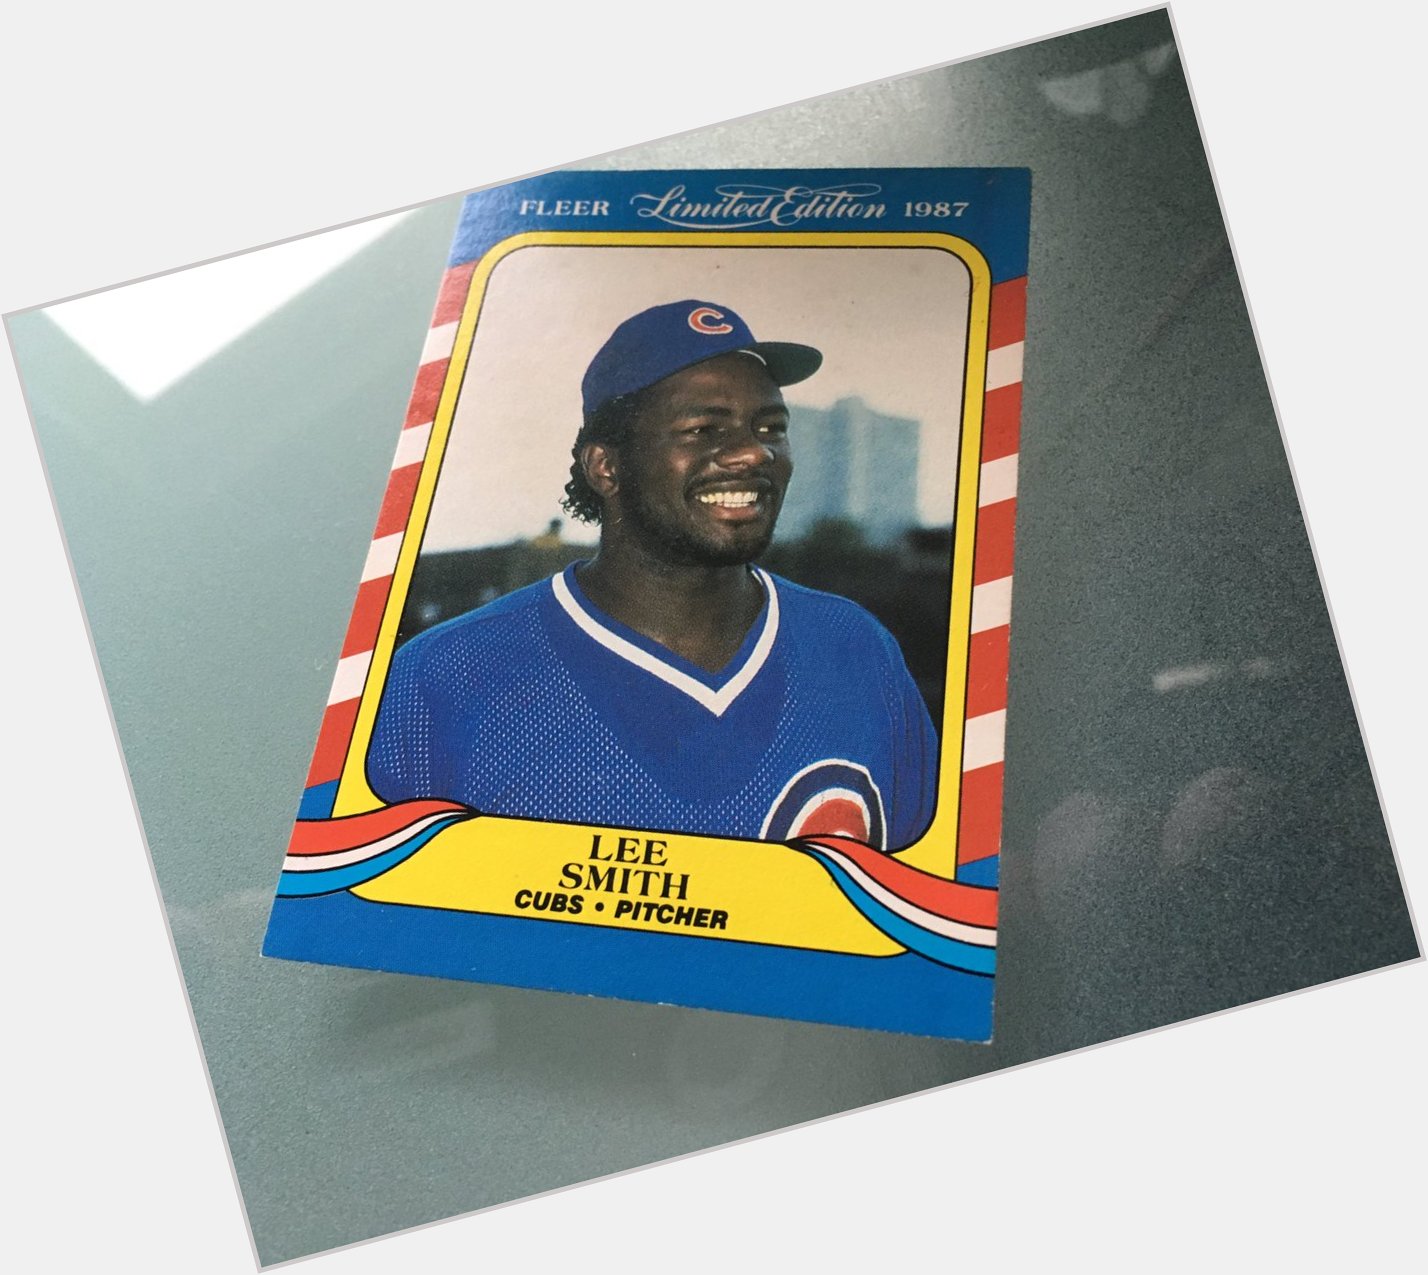 Happy Birthday, Lee Smith!!! This was in my Mailday today 